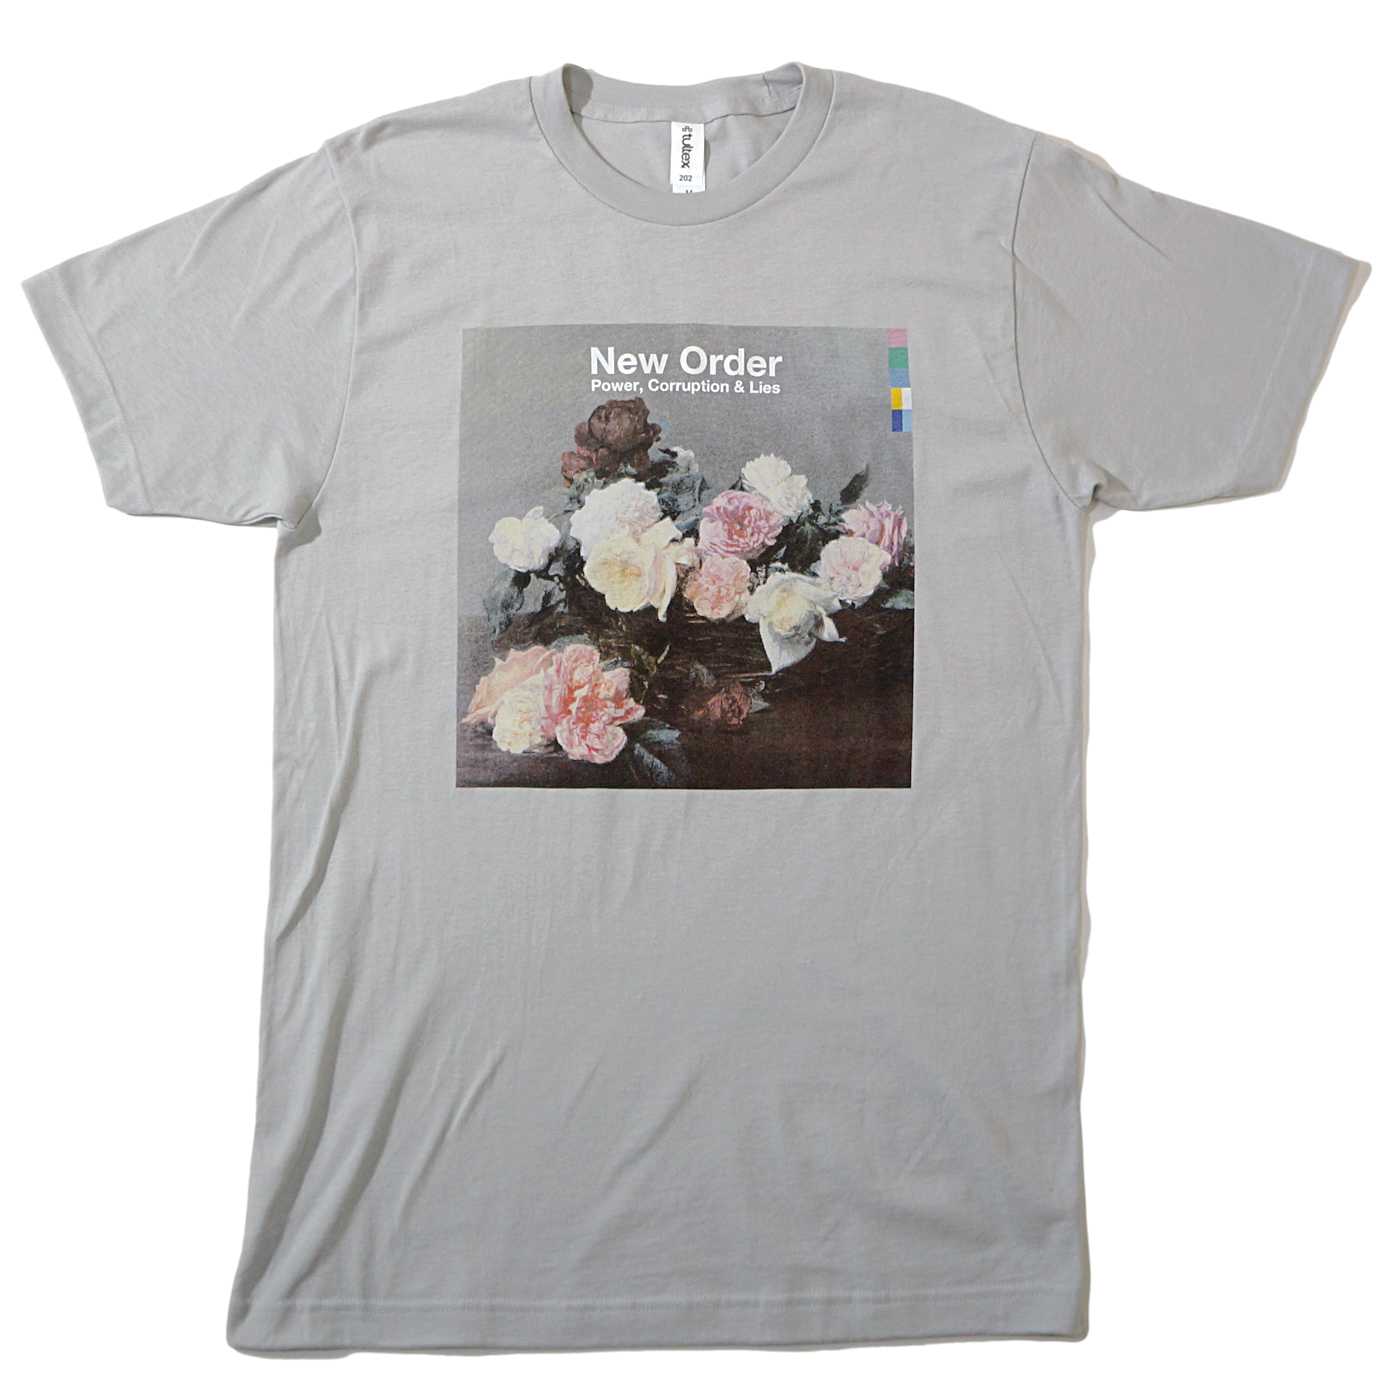 NEW ORDER Tシャツ 権力の美学 Power Corruption & Lies-Silver